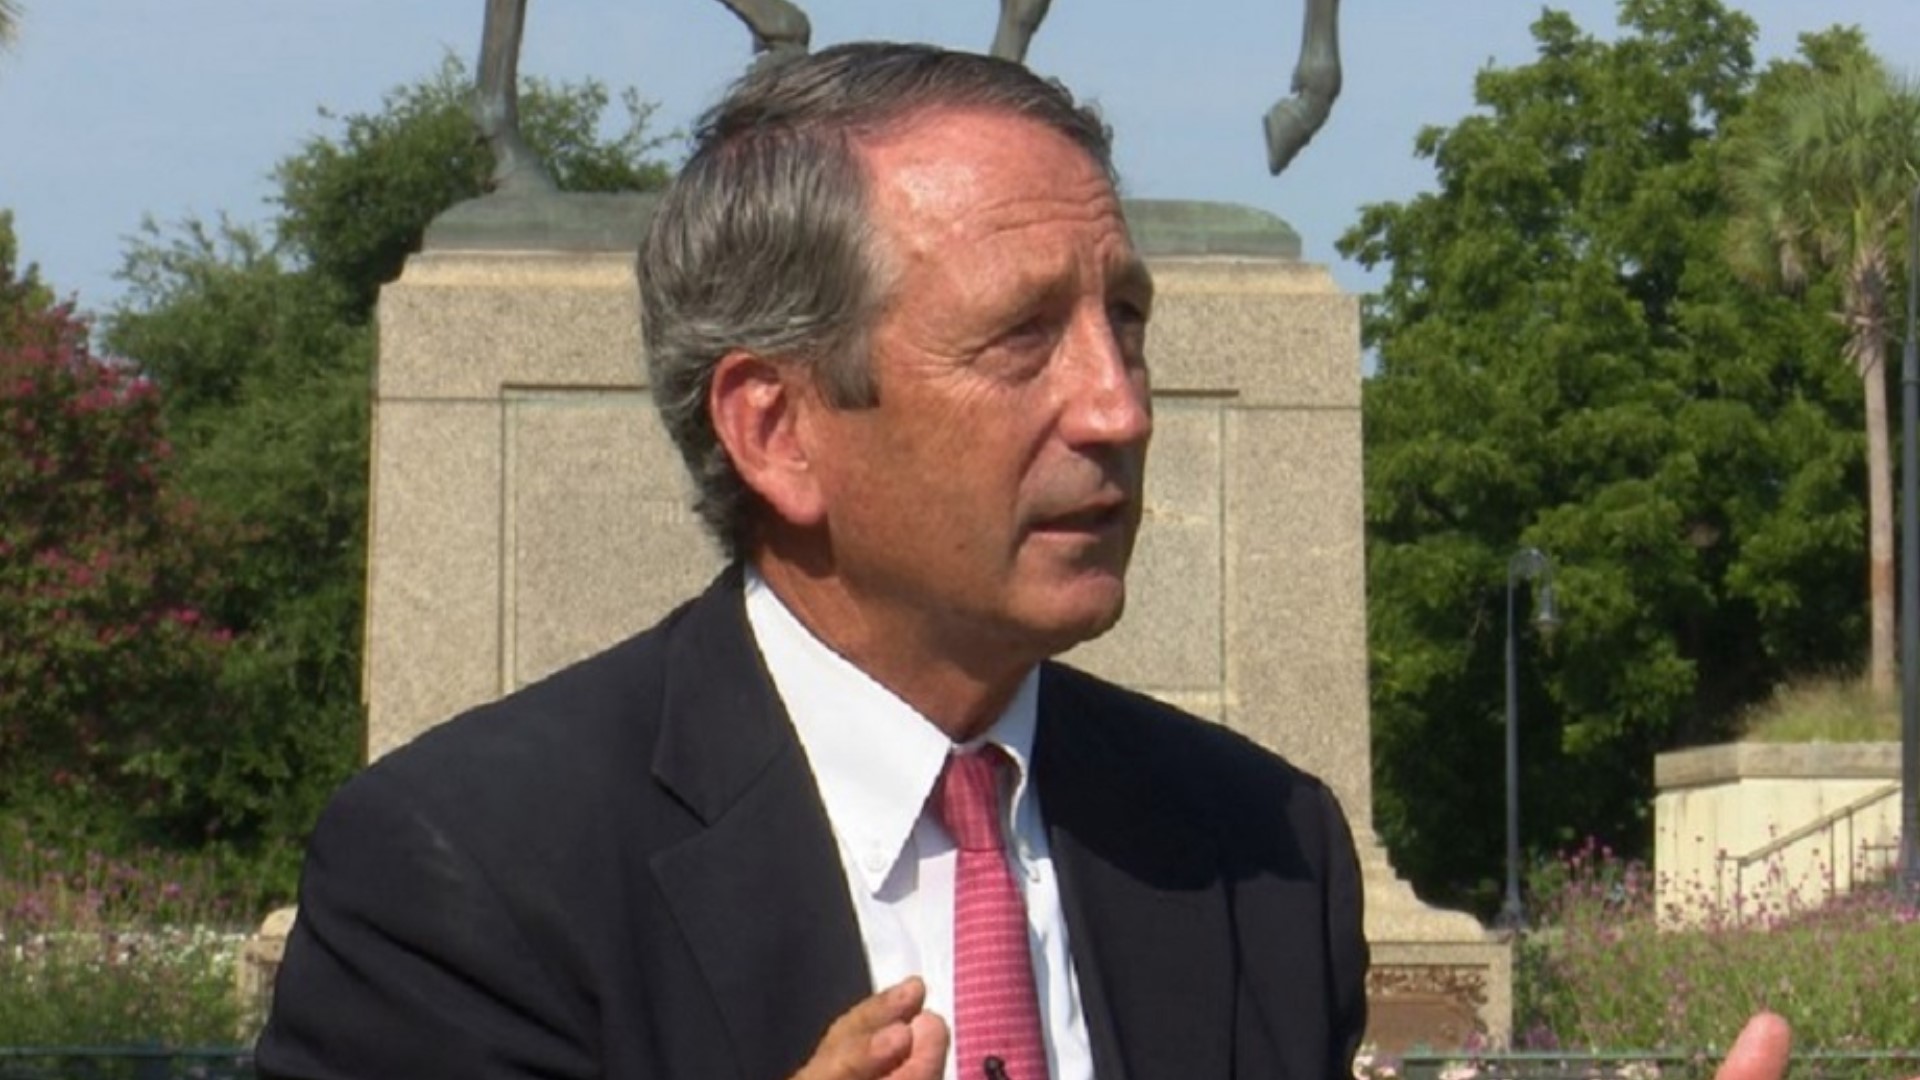 Mark Sanford, the former South Carolina governor and congressman, joined the Republican race against President Donald Trump on Sunday, aiming to put his Appalachian trail travails behind him for good as he pursues an admittedly remote path to the presidency.